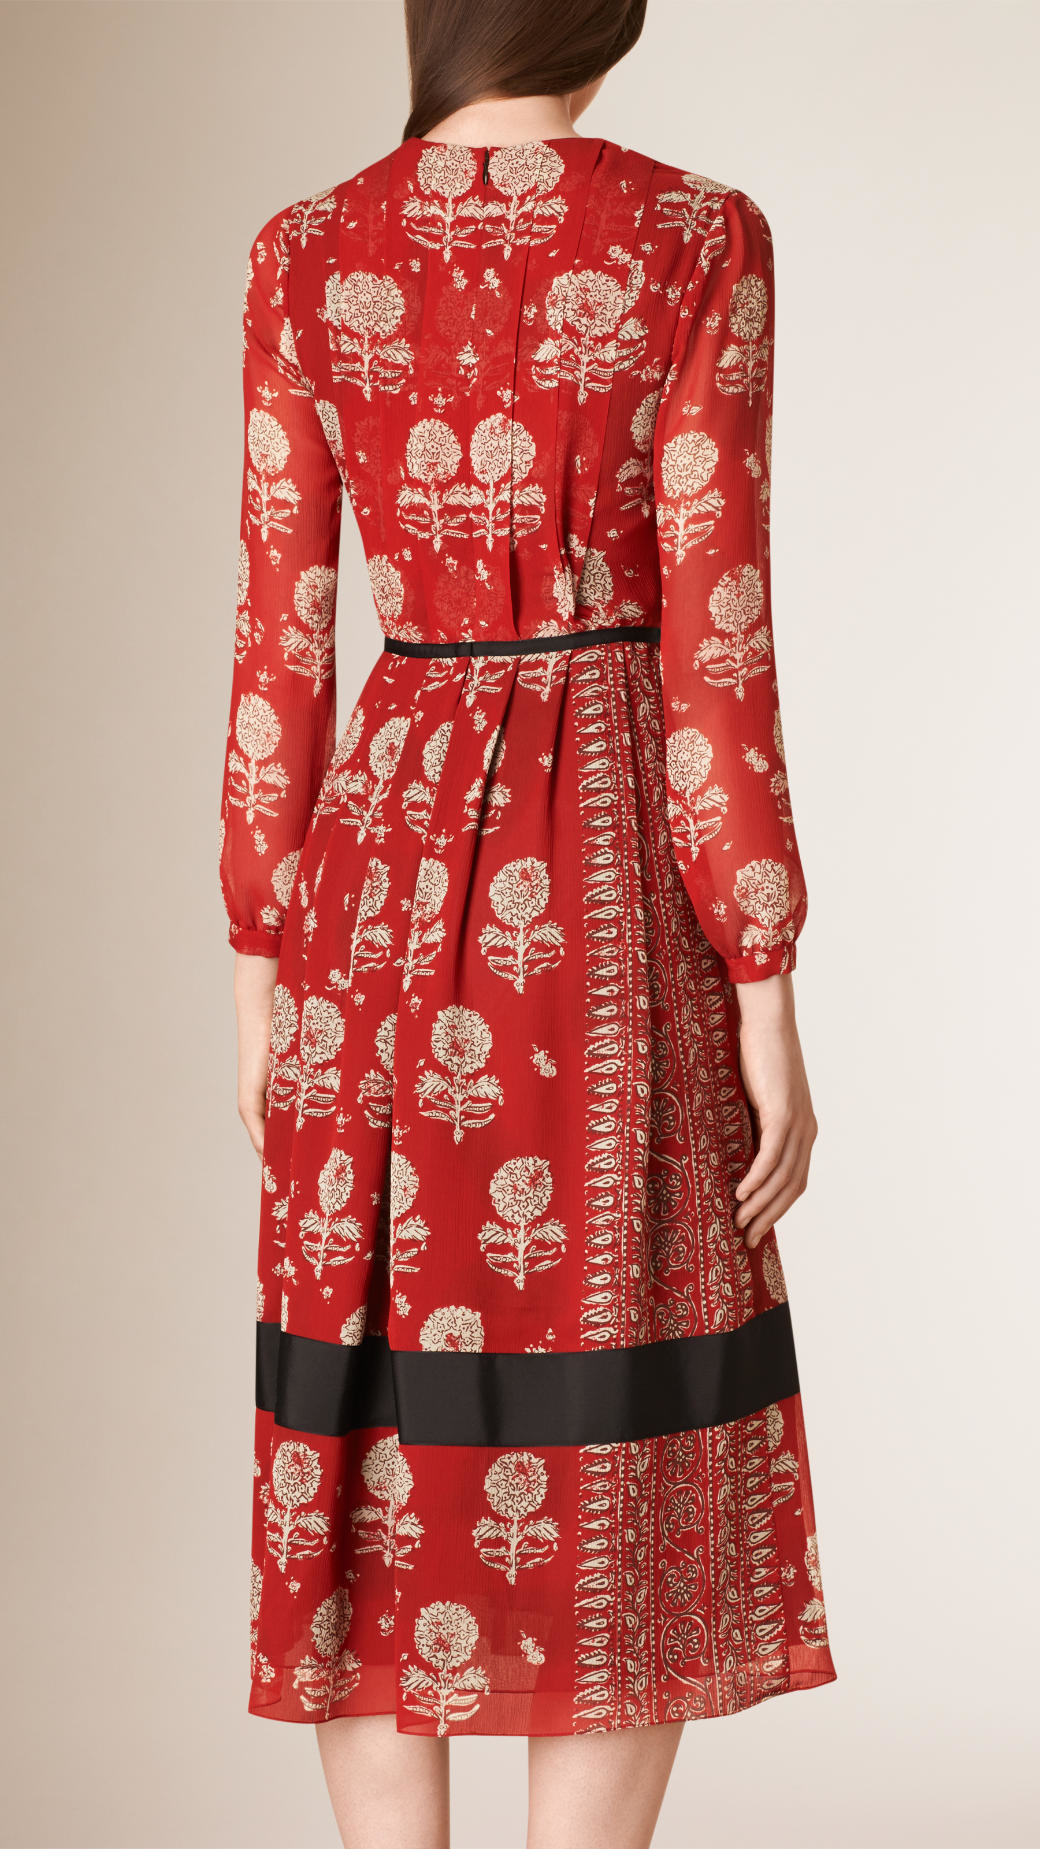 Burberry Floral Print Silk A-line Dress in Military Red (Red) | Lyst